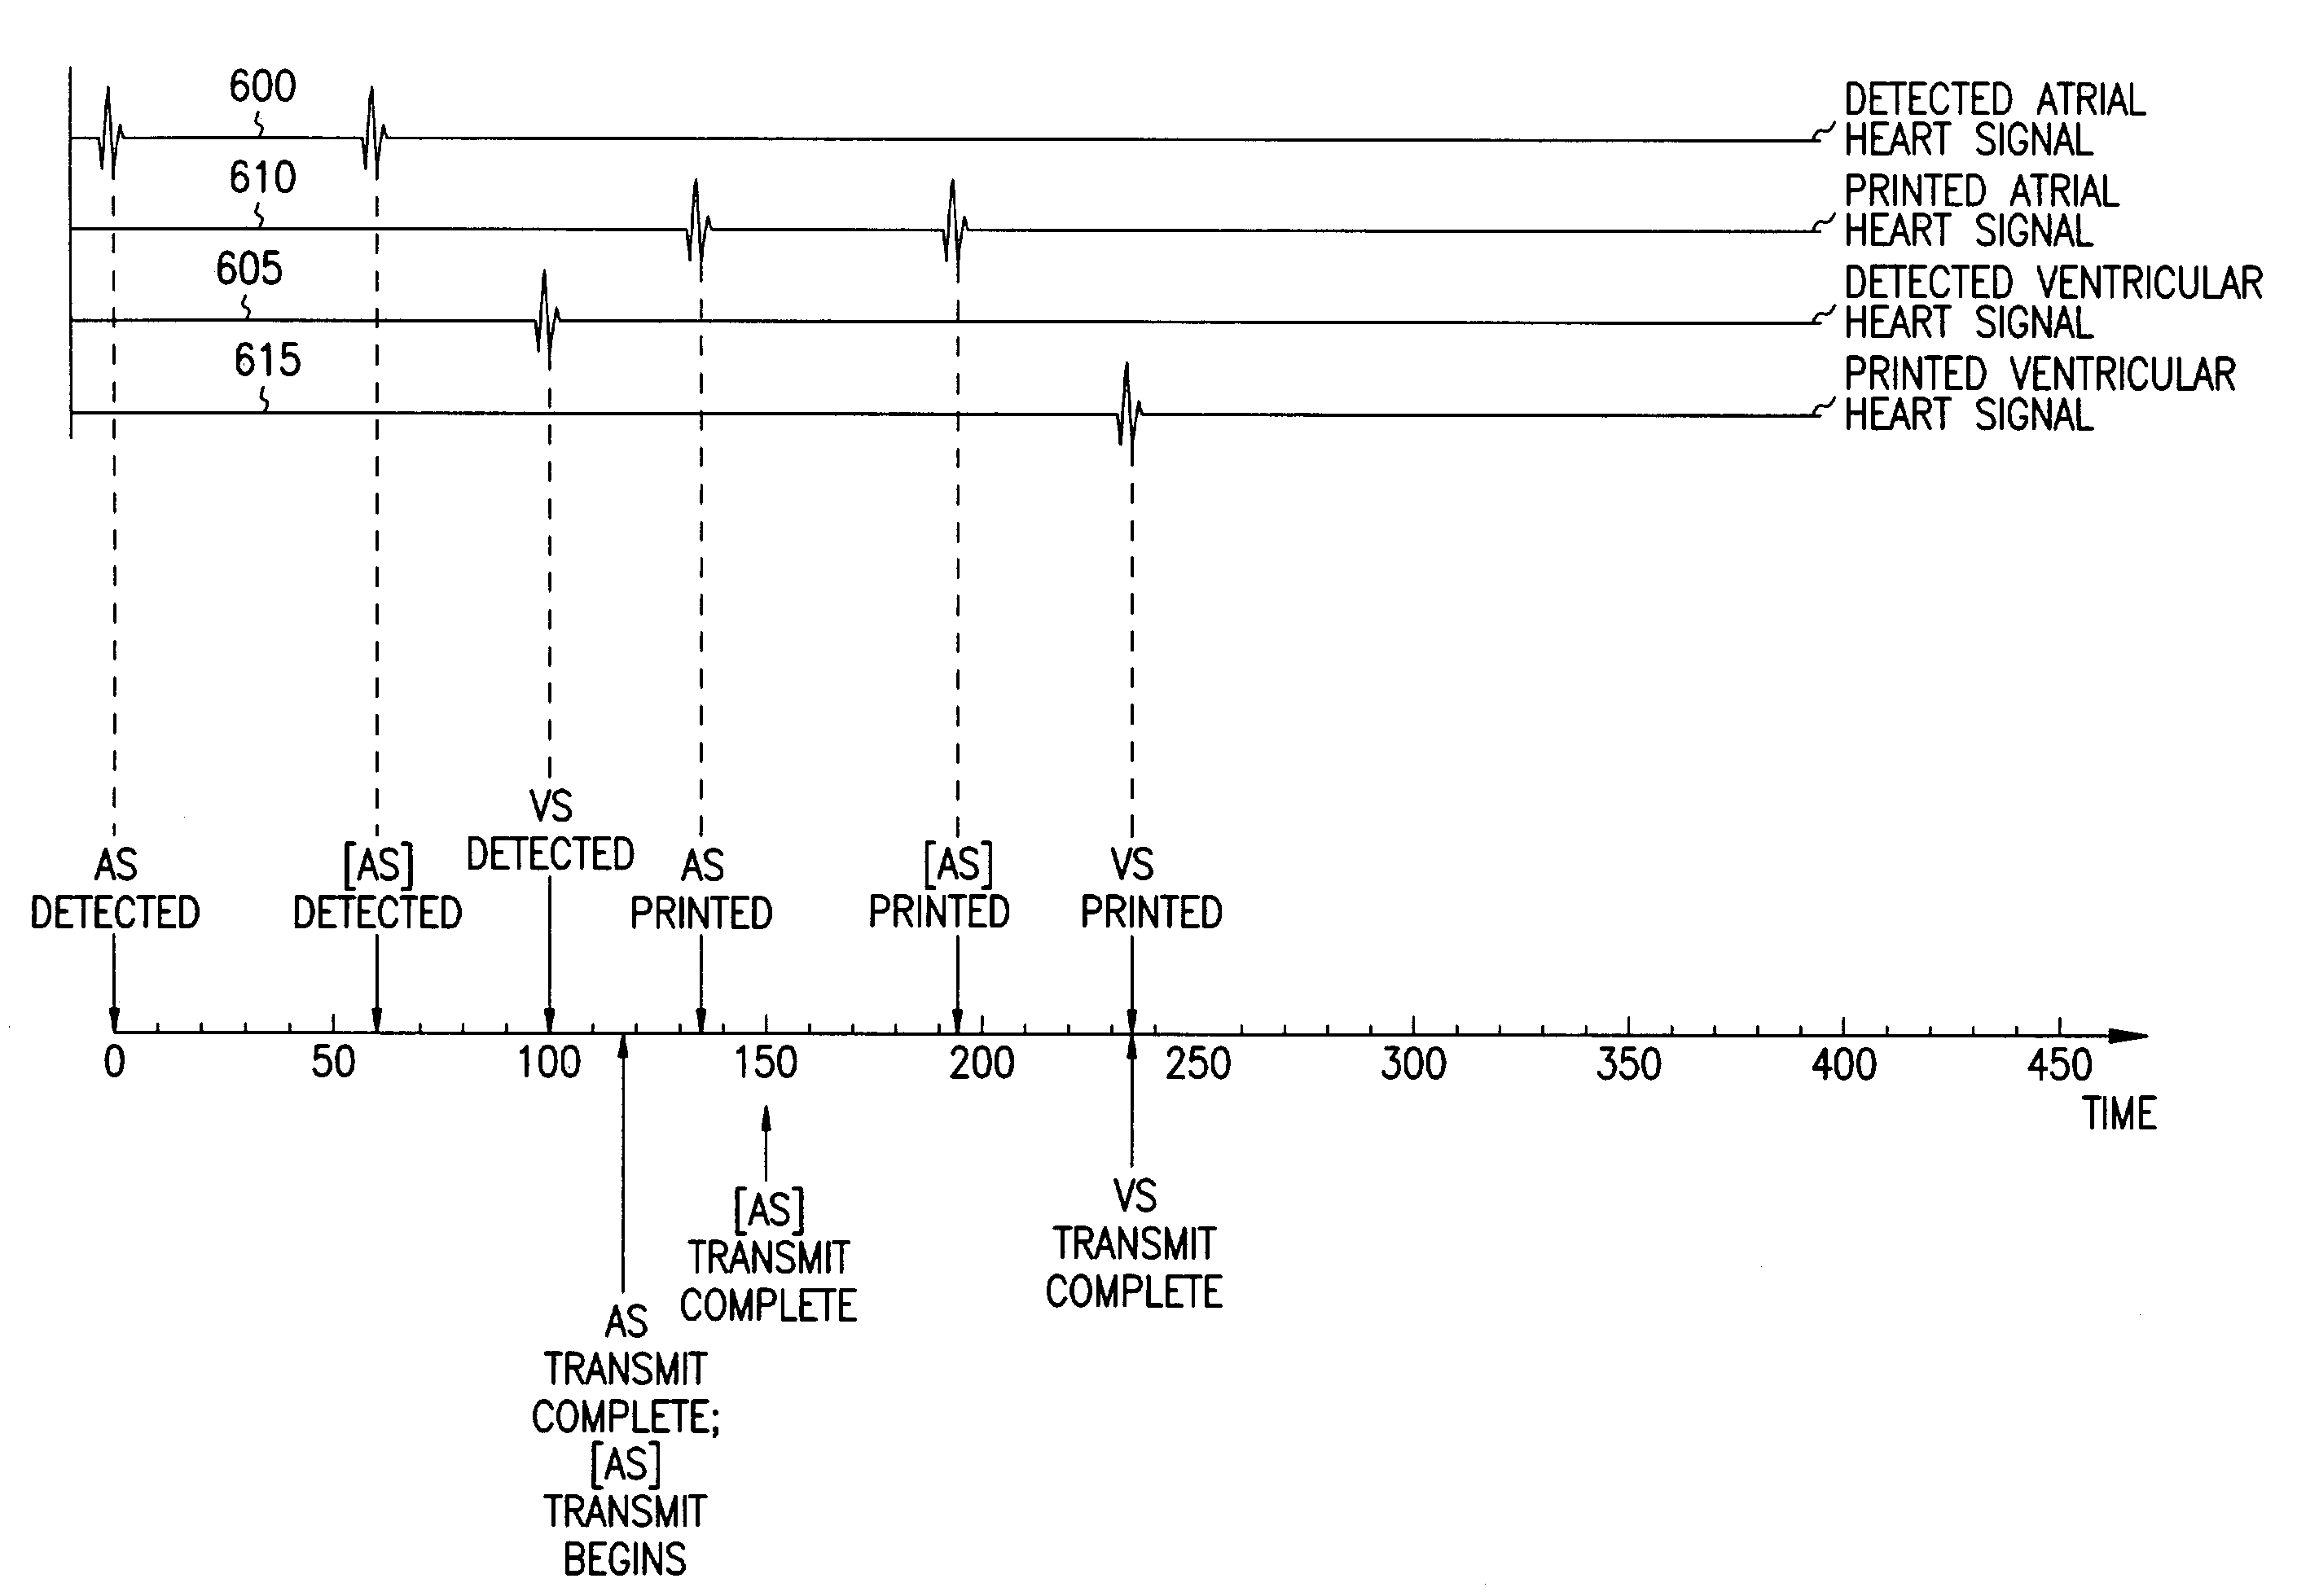 Event marker alignment by inclusion of event marker transmission latency in the real-time data stream